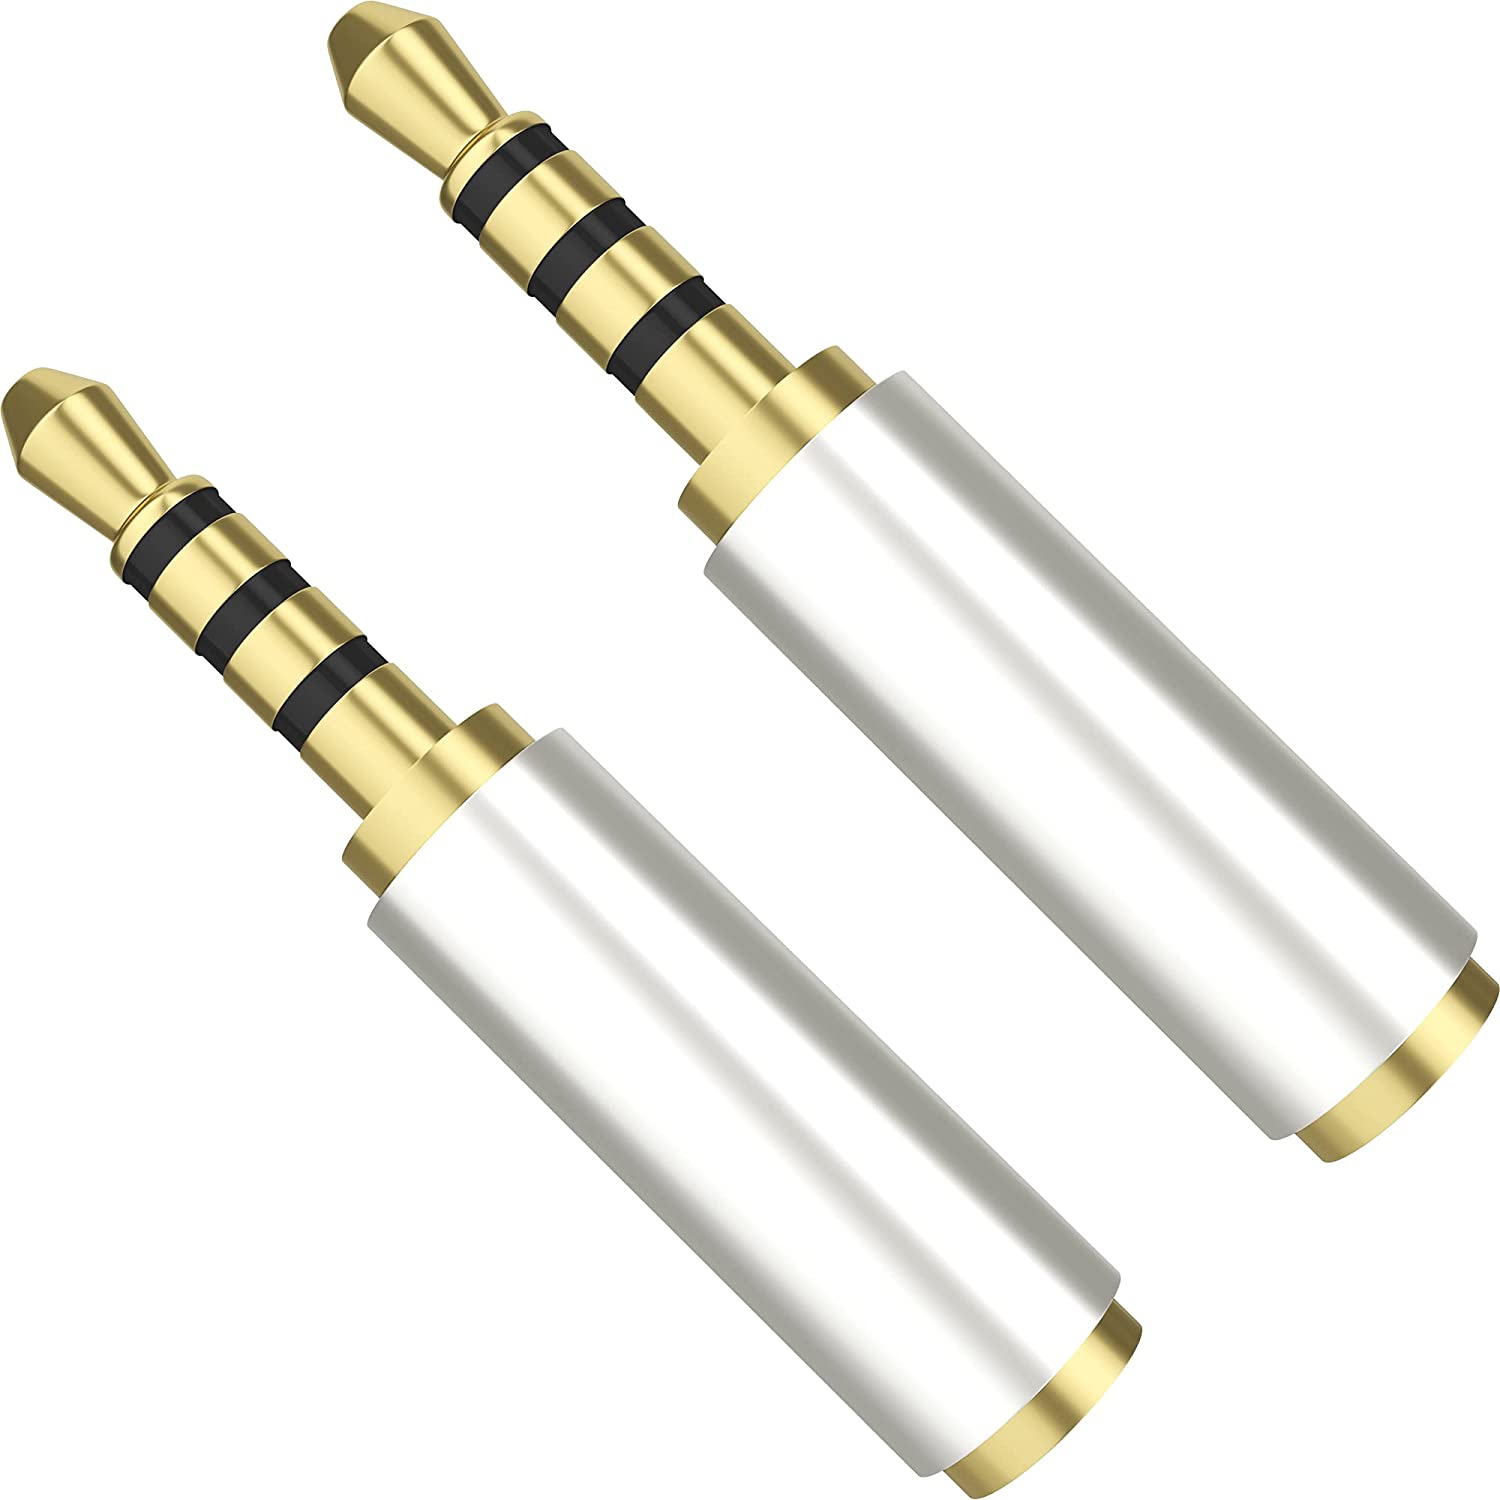 Gold Plated Audio Adapter 3.5mm Male to 2.5mm Female Headphone Stereo Jack or Mono for Apple iPhone 3GS 4G 4S 5 Samsung Galaxy S3 S4 Galaxy Note 2 iPad 2 3 4 iPad Mini (2 Pack)